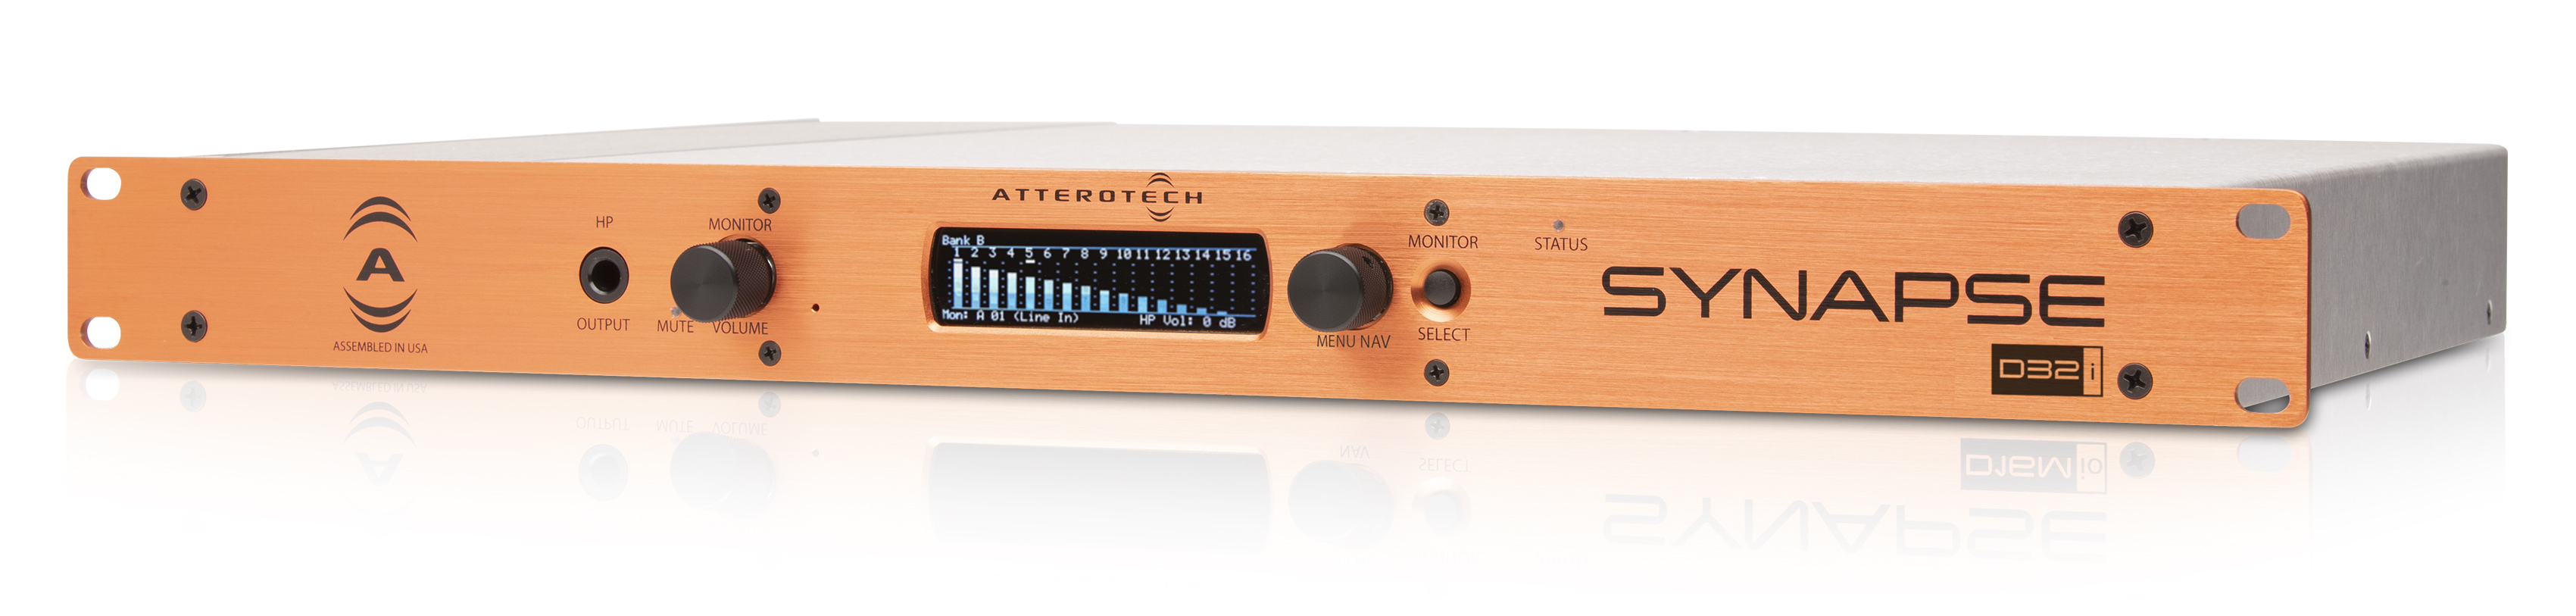 Synapse D32i At Rack Mount Network Audio Interfaces Attero